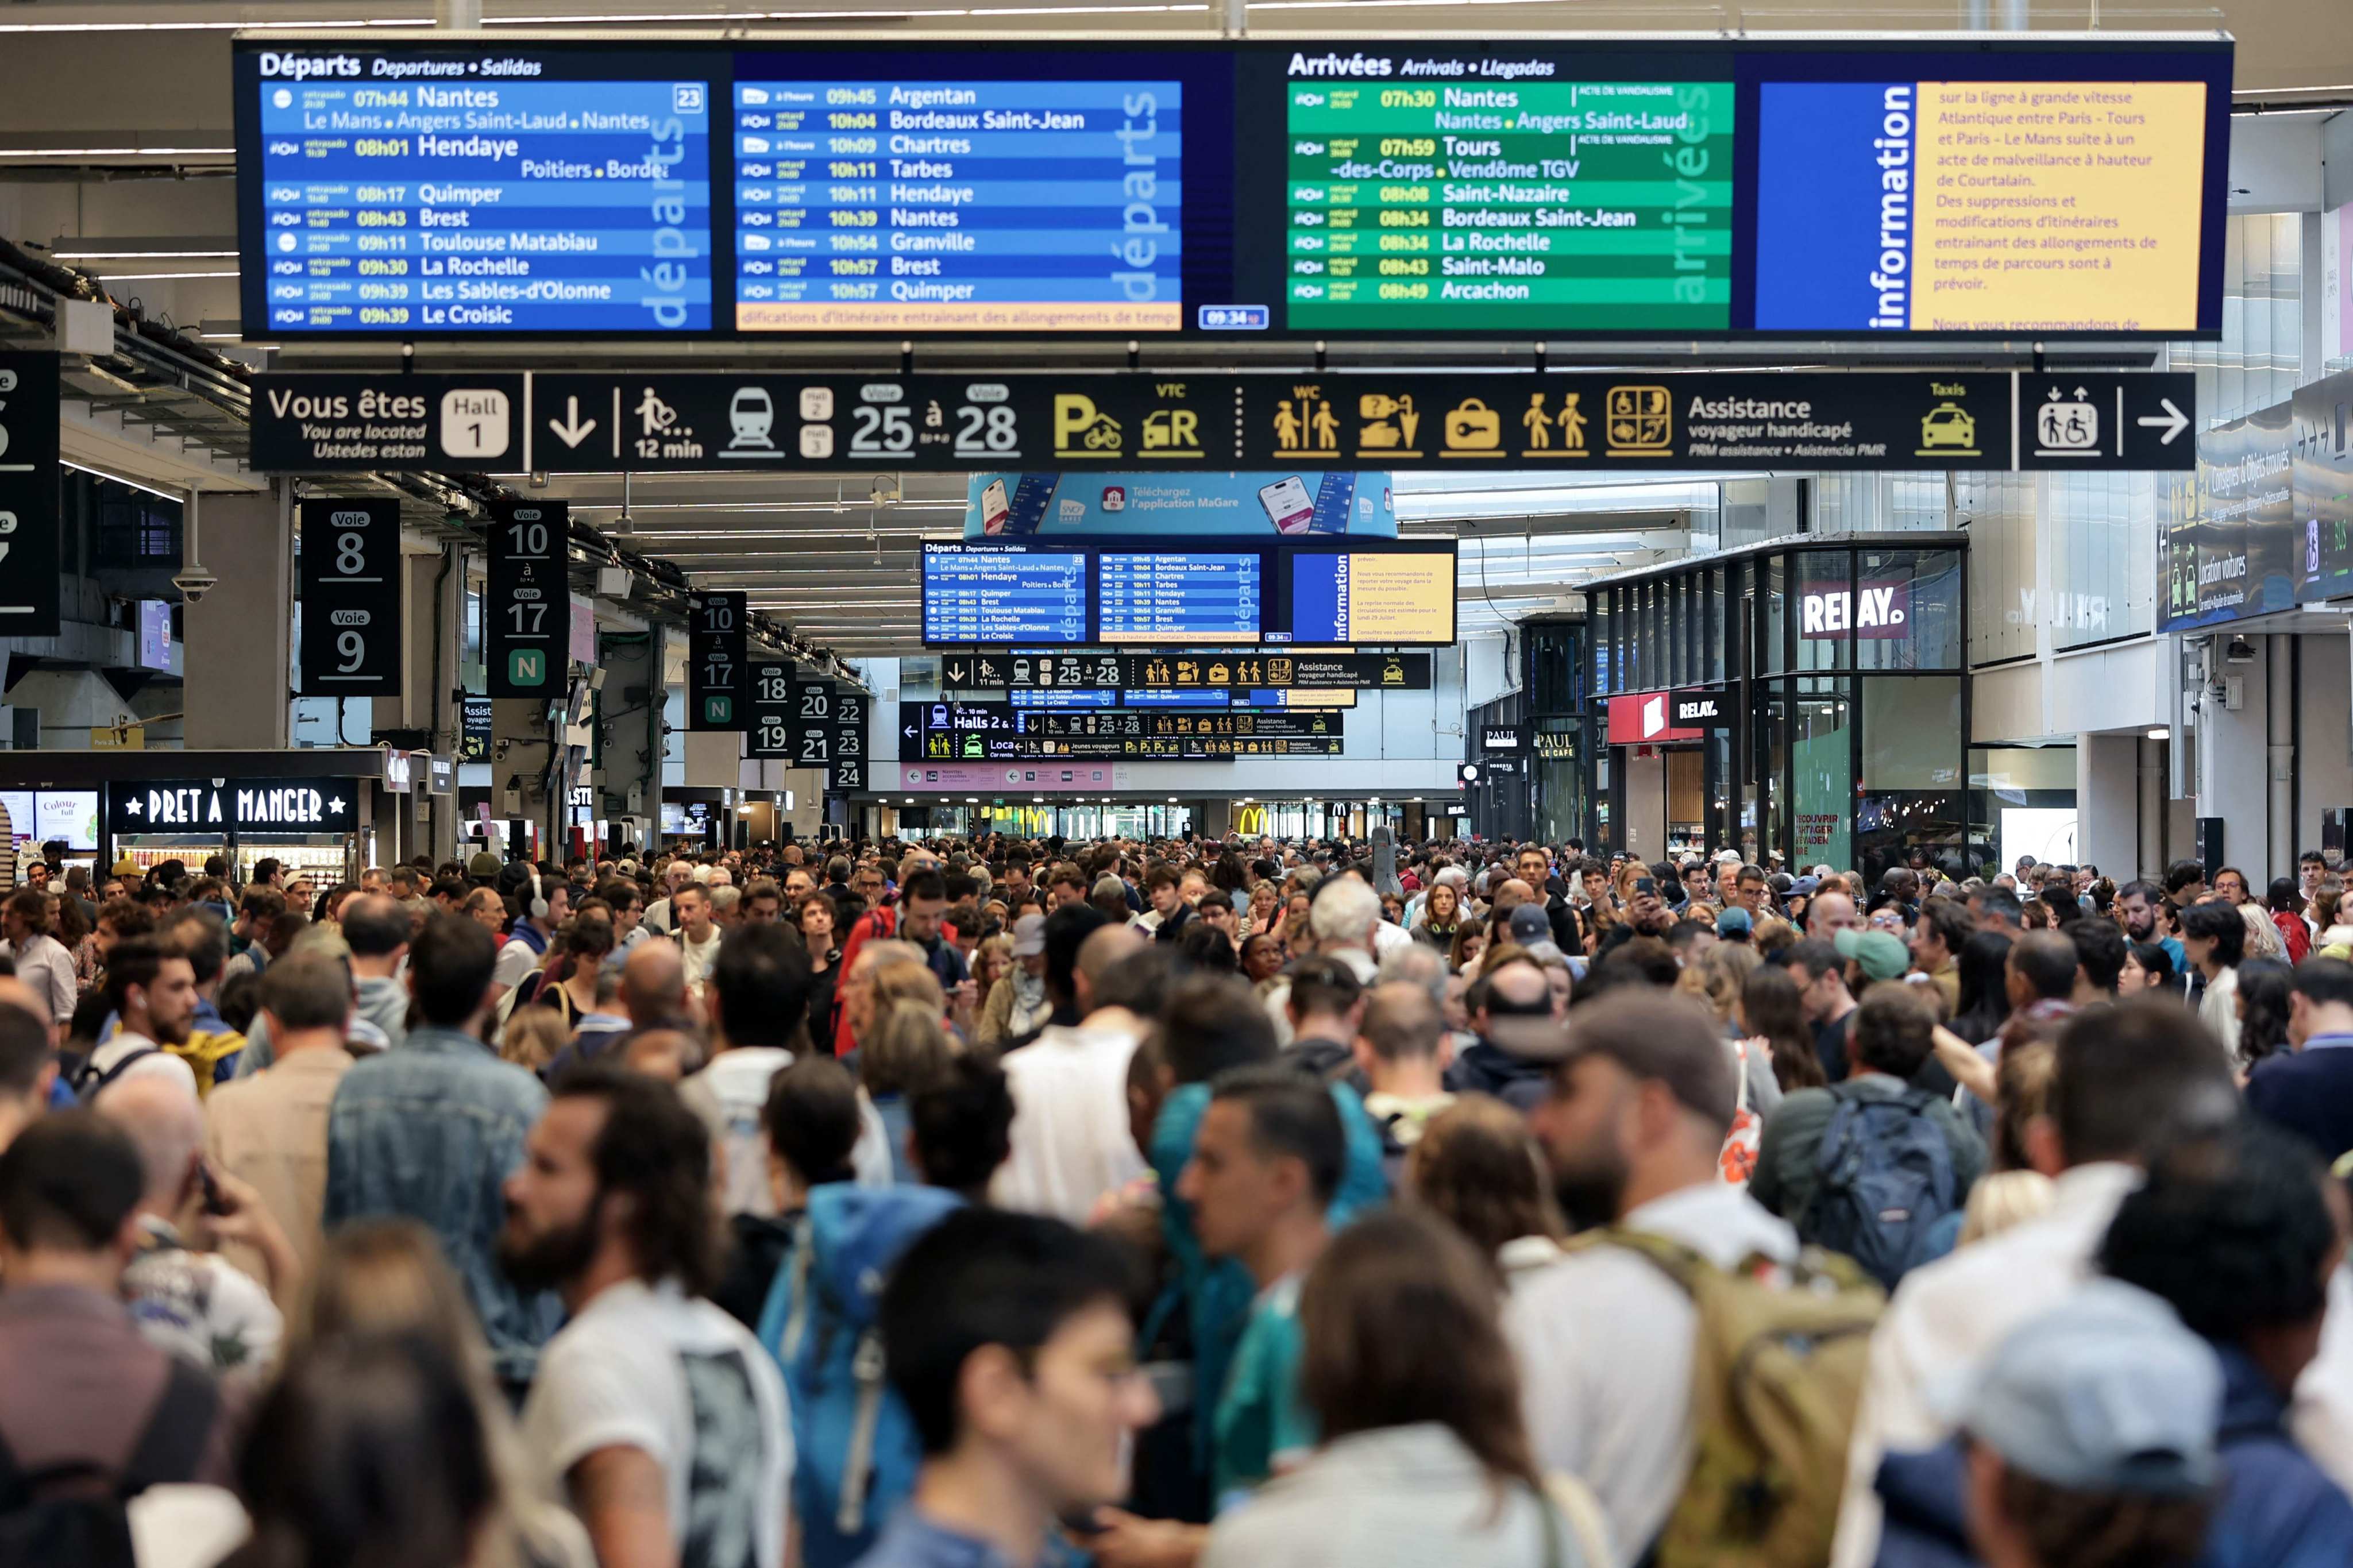 Passengers at the Gare Montparnasse train station in Paris on Friday. Photo: AFP